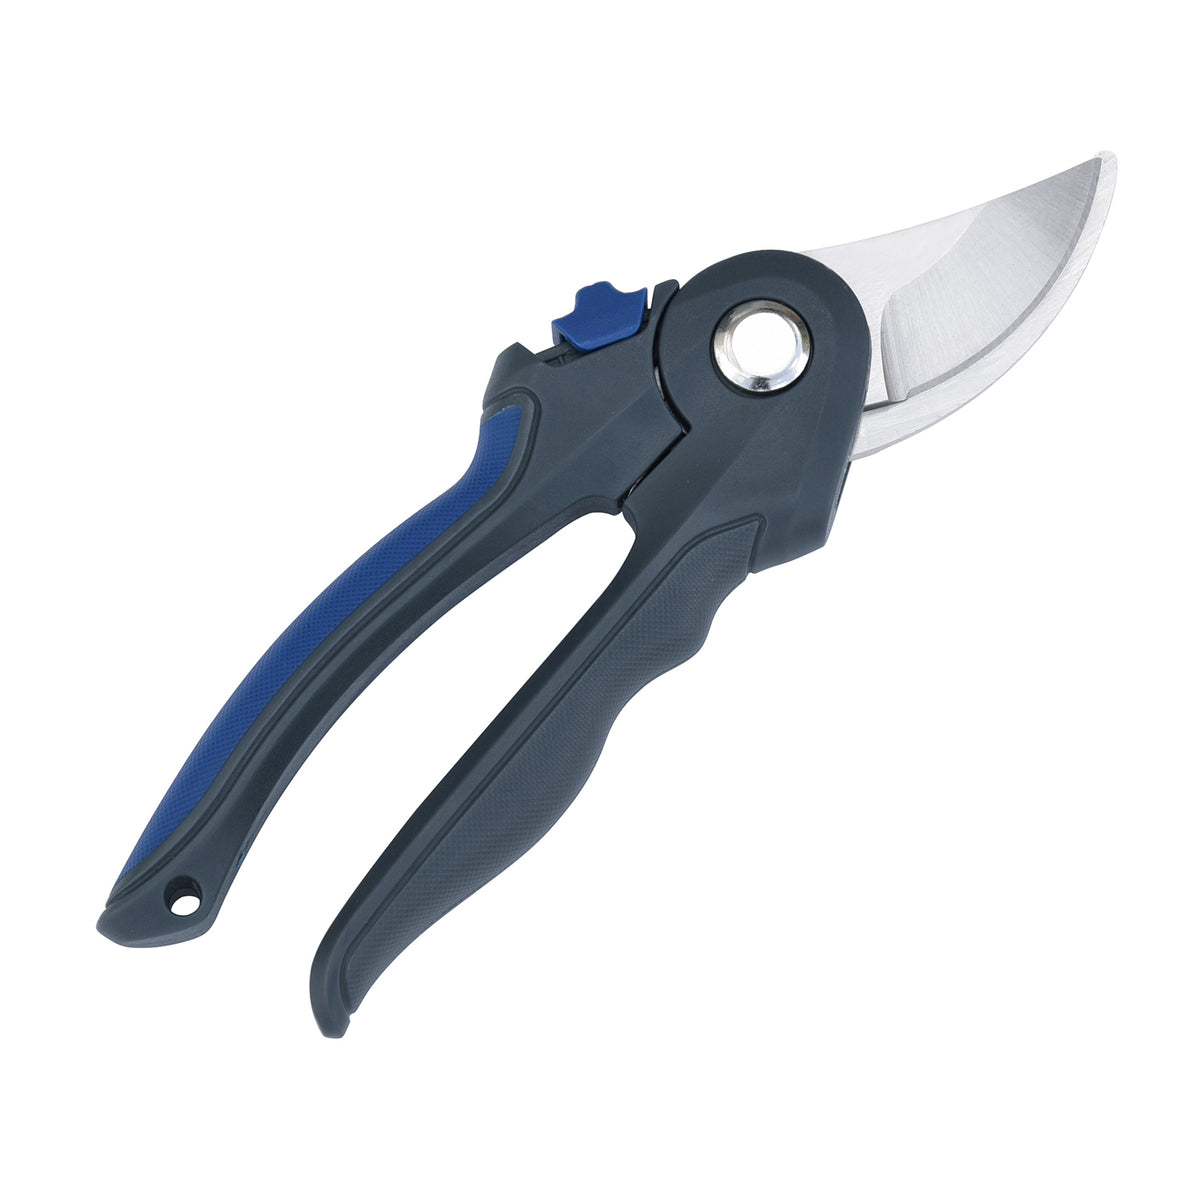 Stainless Steel Bypass Pruner with TRP Handle